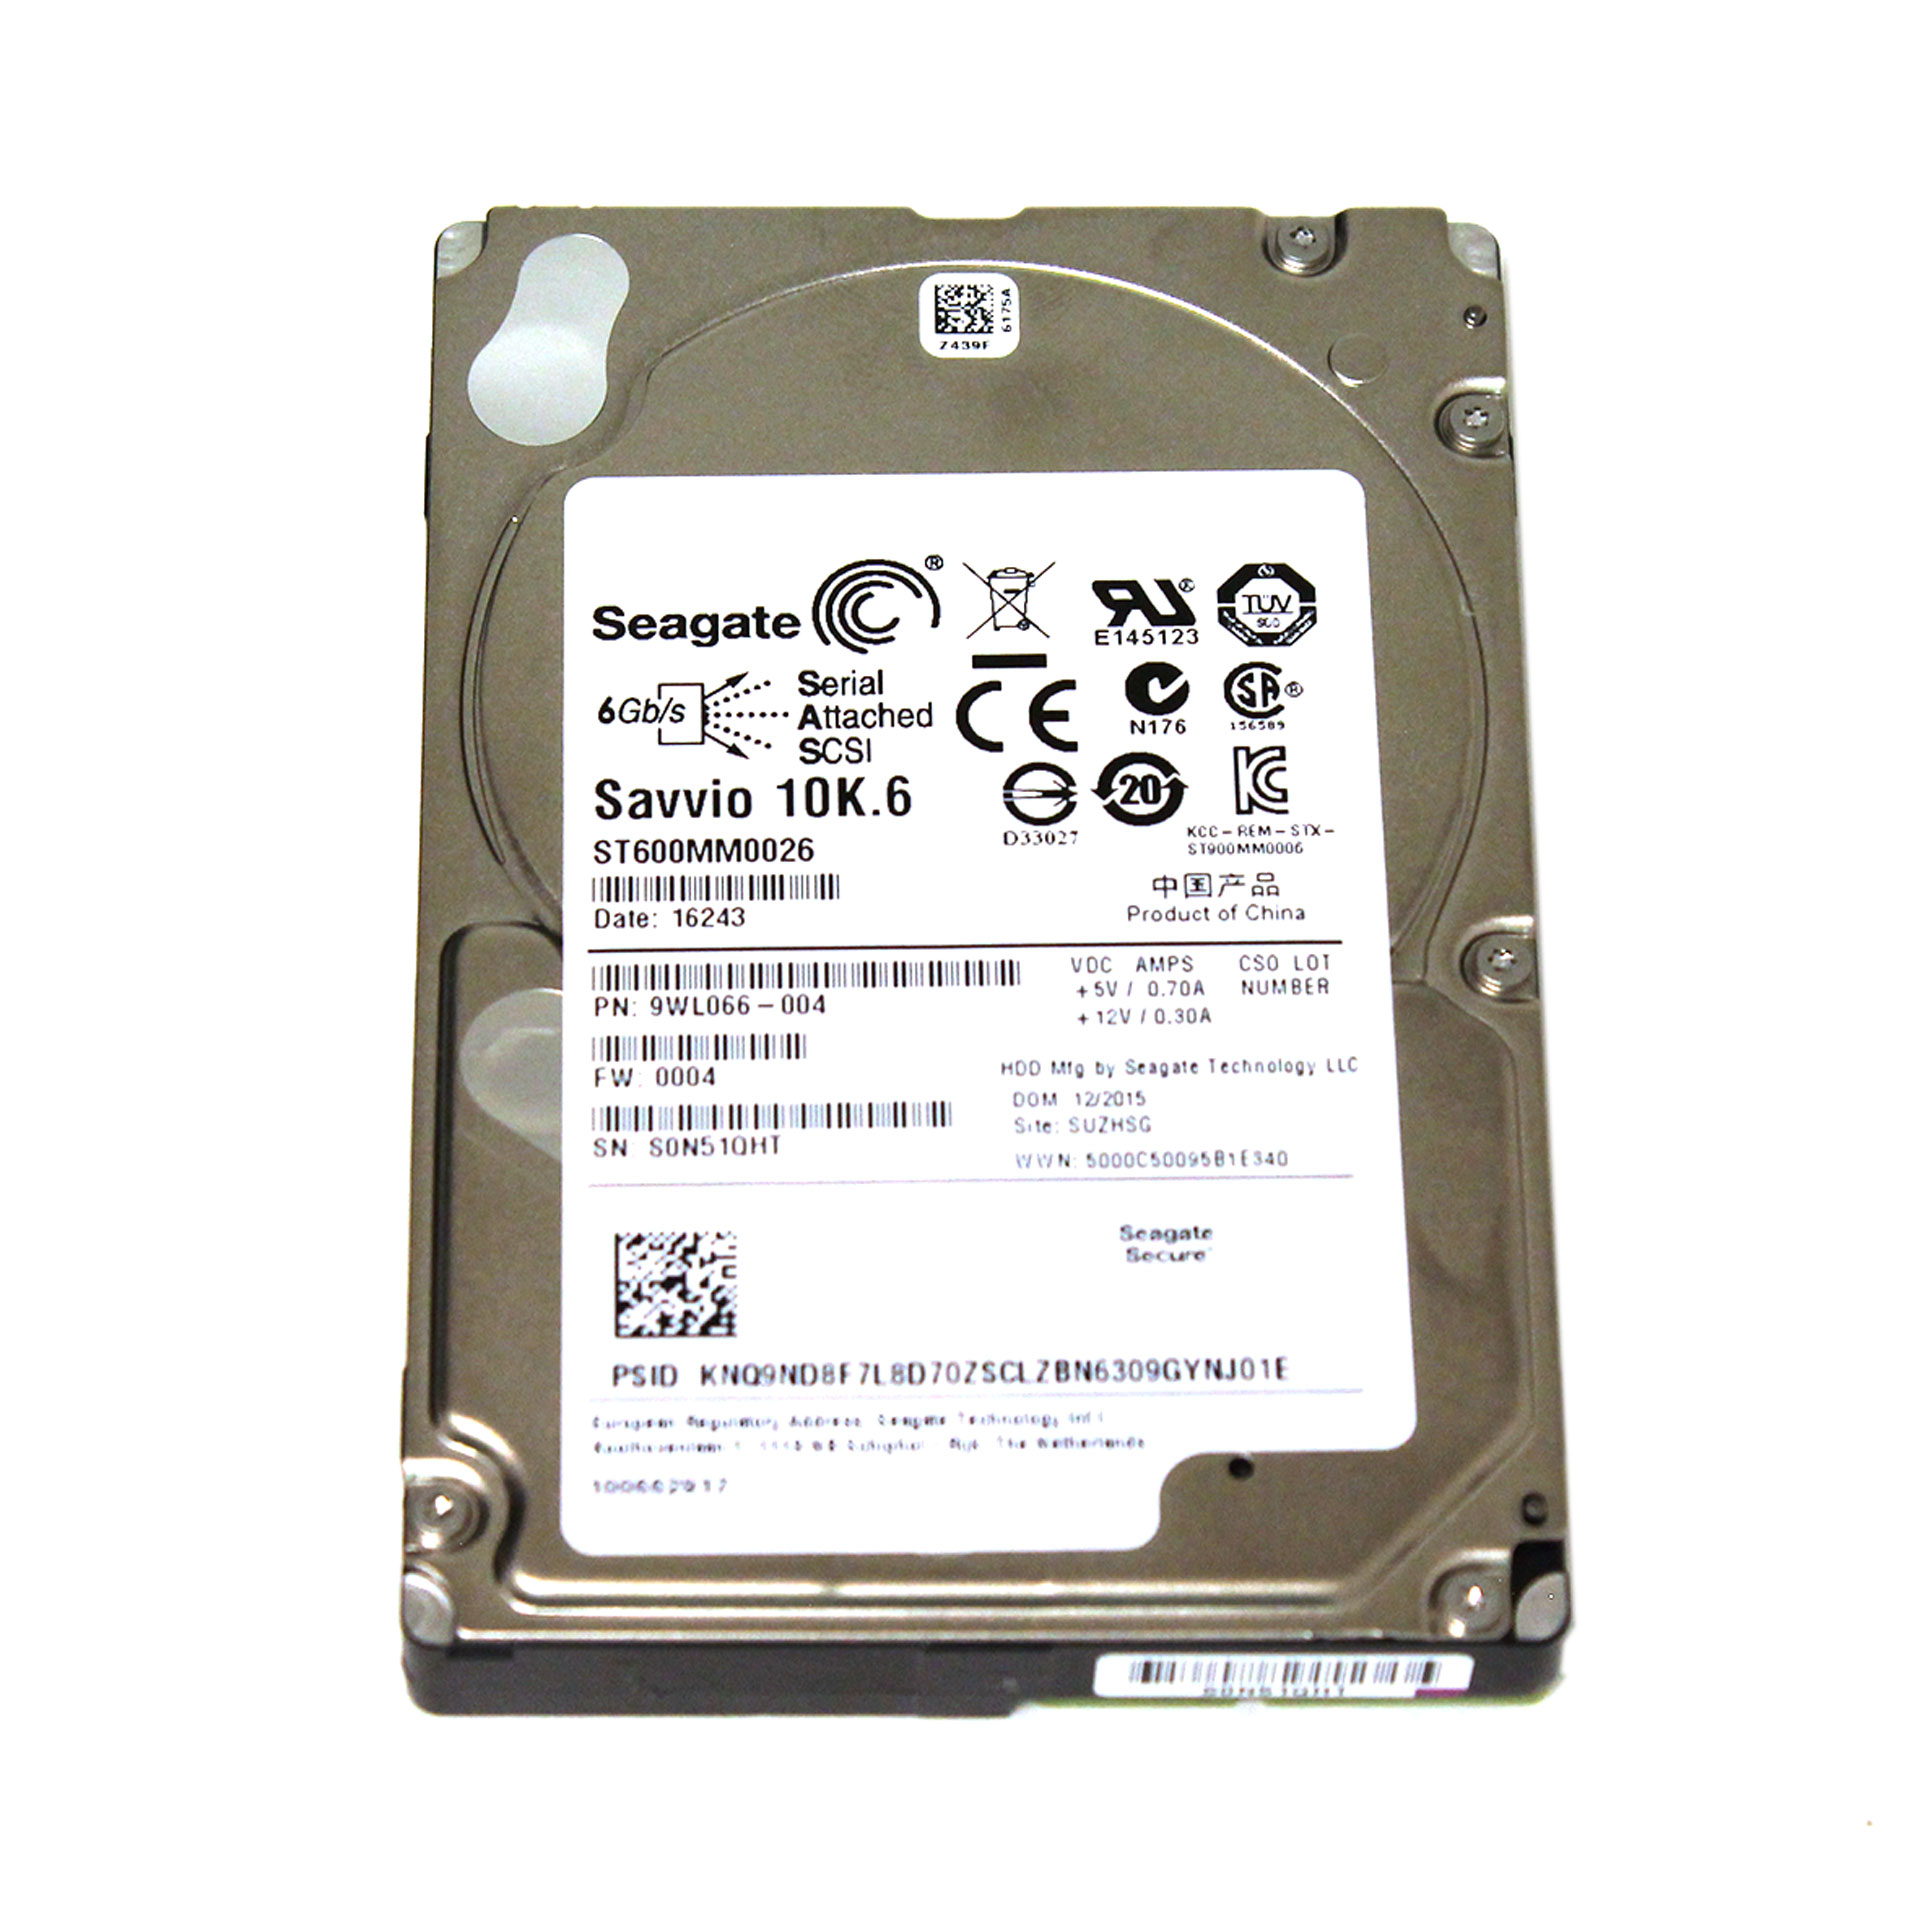 Seagate Enterprise Performance 10K HDD ST600MM0026 9WL066-004 - Click Image to Close